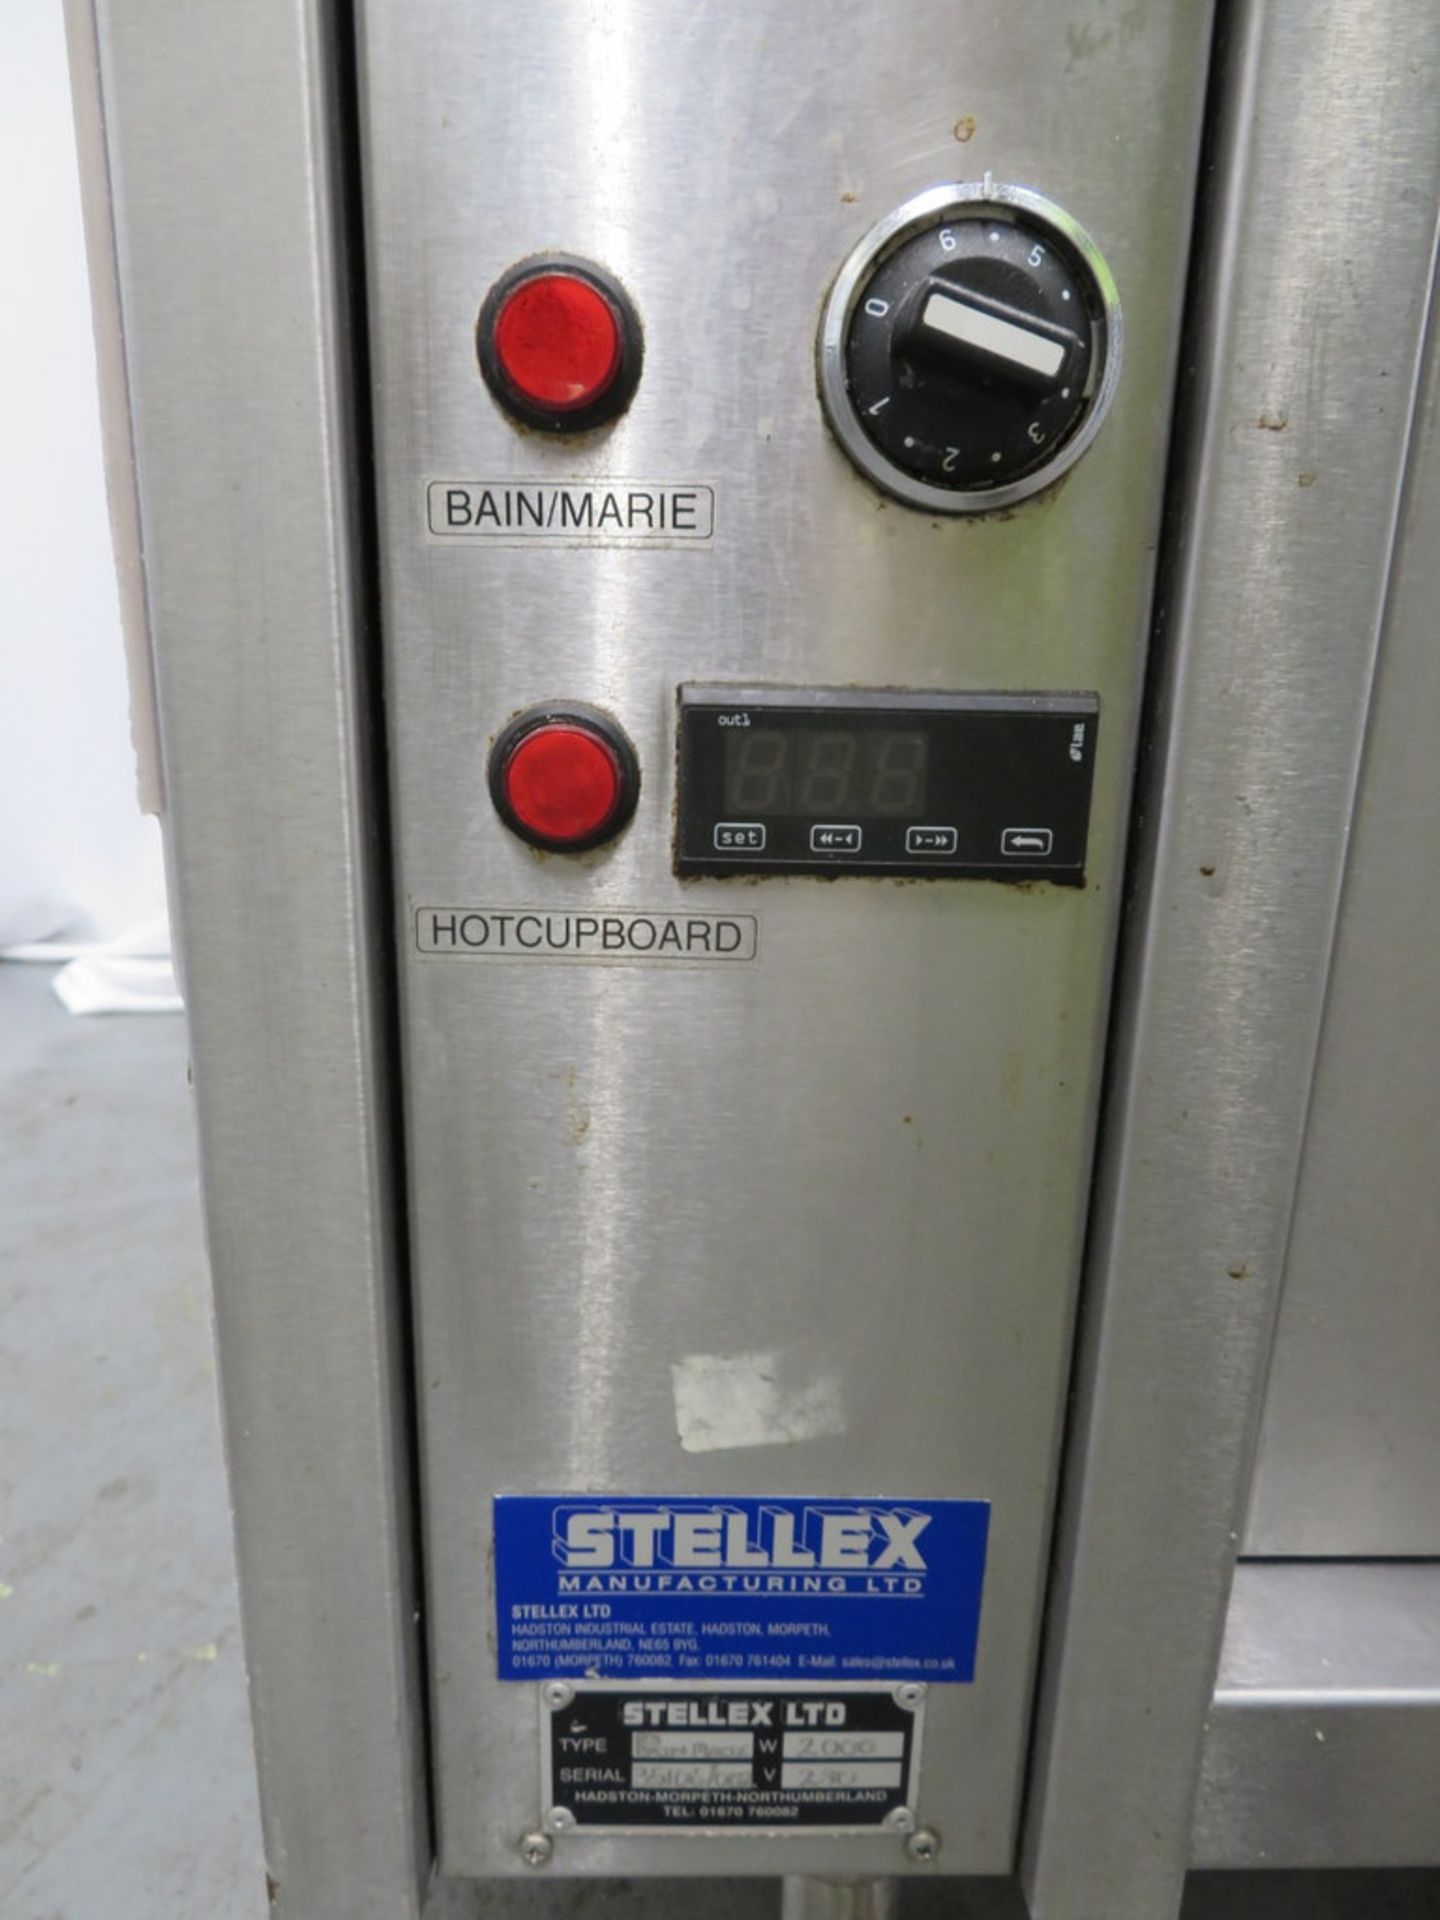 STELLEX S/S BAIN MARIE COUNTER AND HOT CUPBOARD - Image 2 of 6